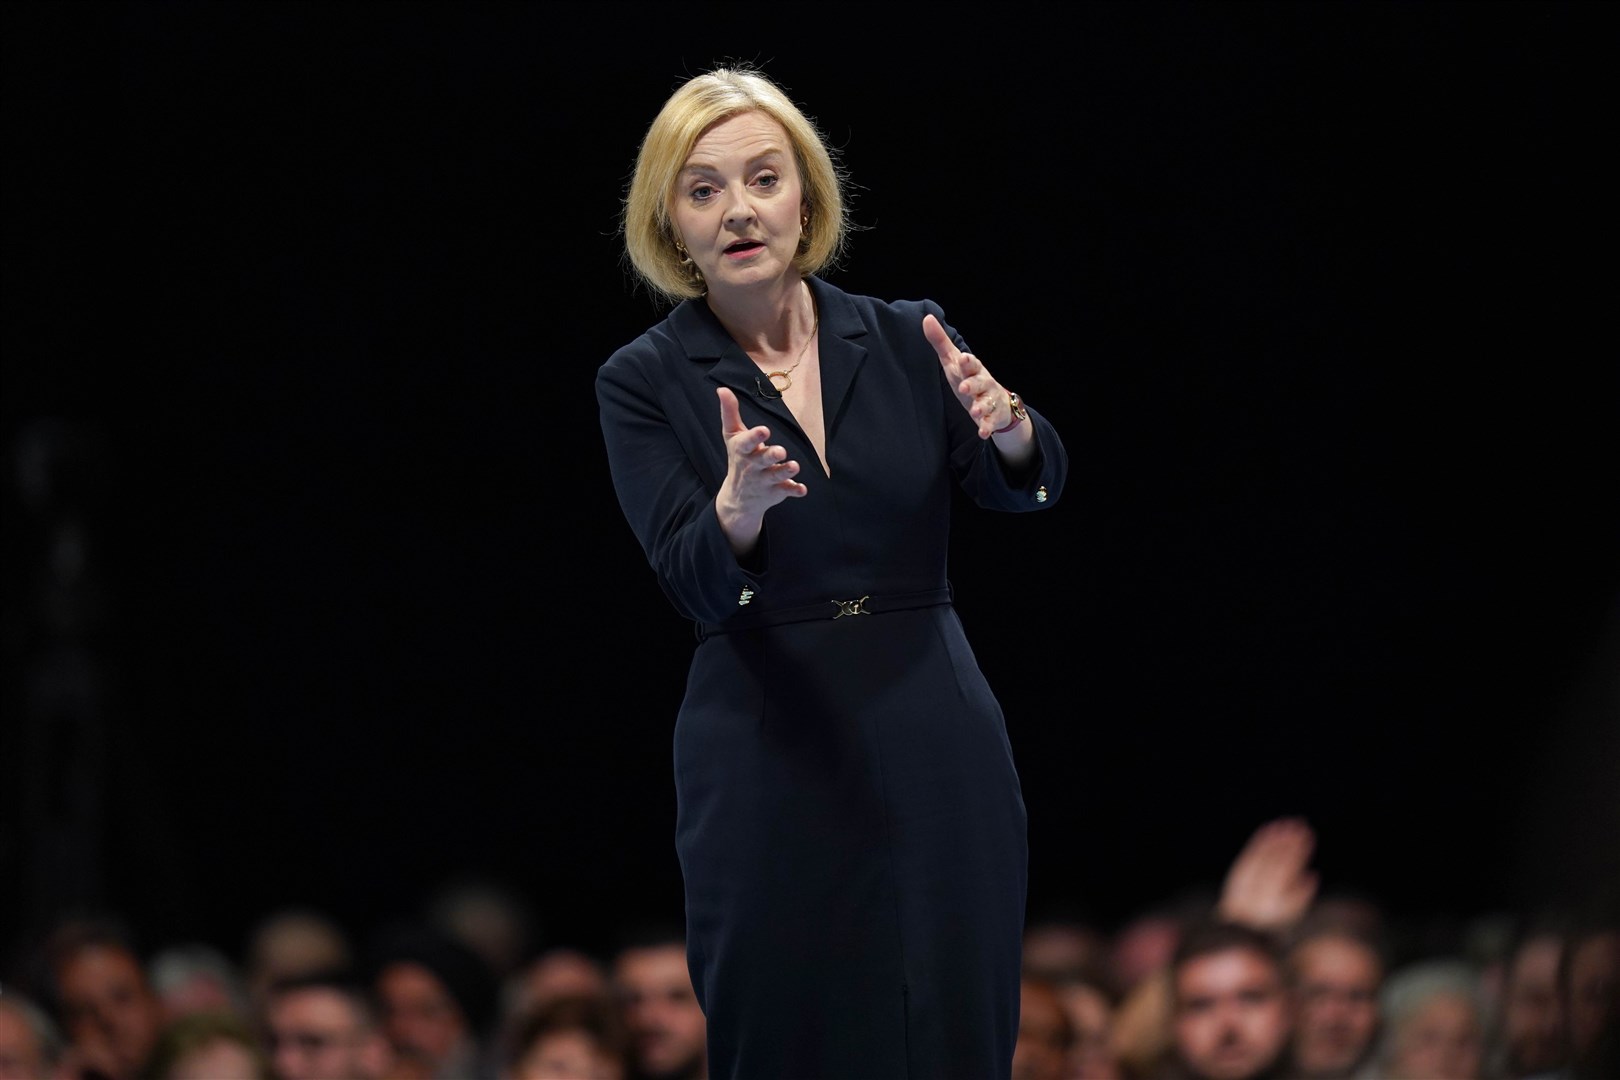 Liz Truss speaking during a hustings event at the NEC in Birmingham as part of her campaign to be leader of the Conservative Party and the next prime minister (Jacob King/PA) 